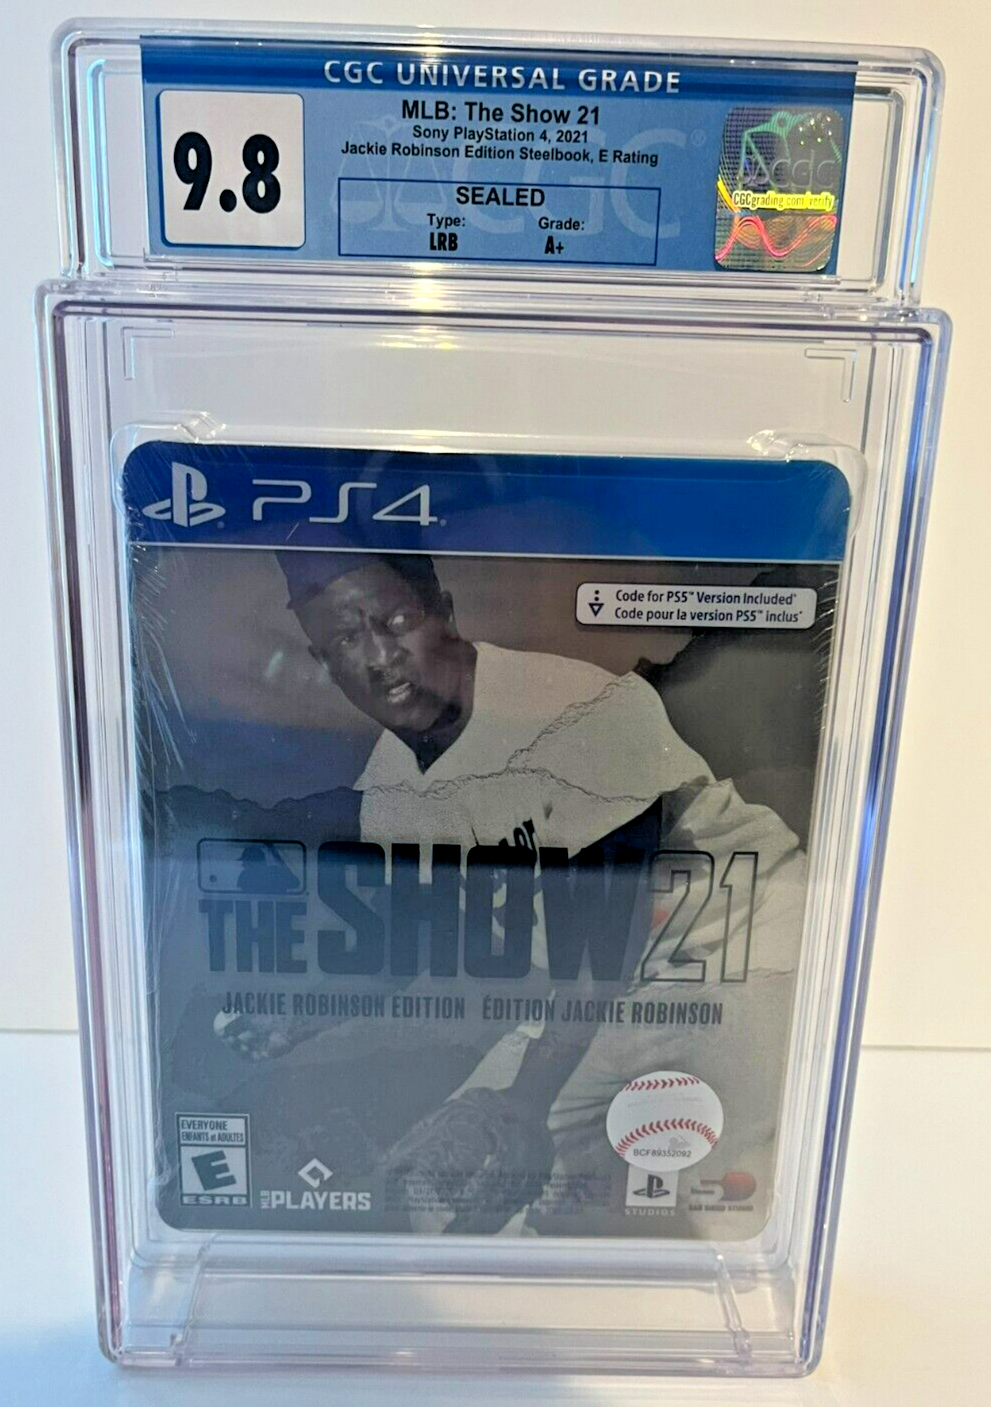 MLB: The Show 21 Jackie Robinson Edition PlayStation 4 (2021) Sealed CGC 9.8 - 643-collectibles